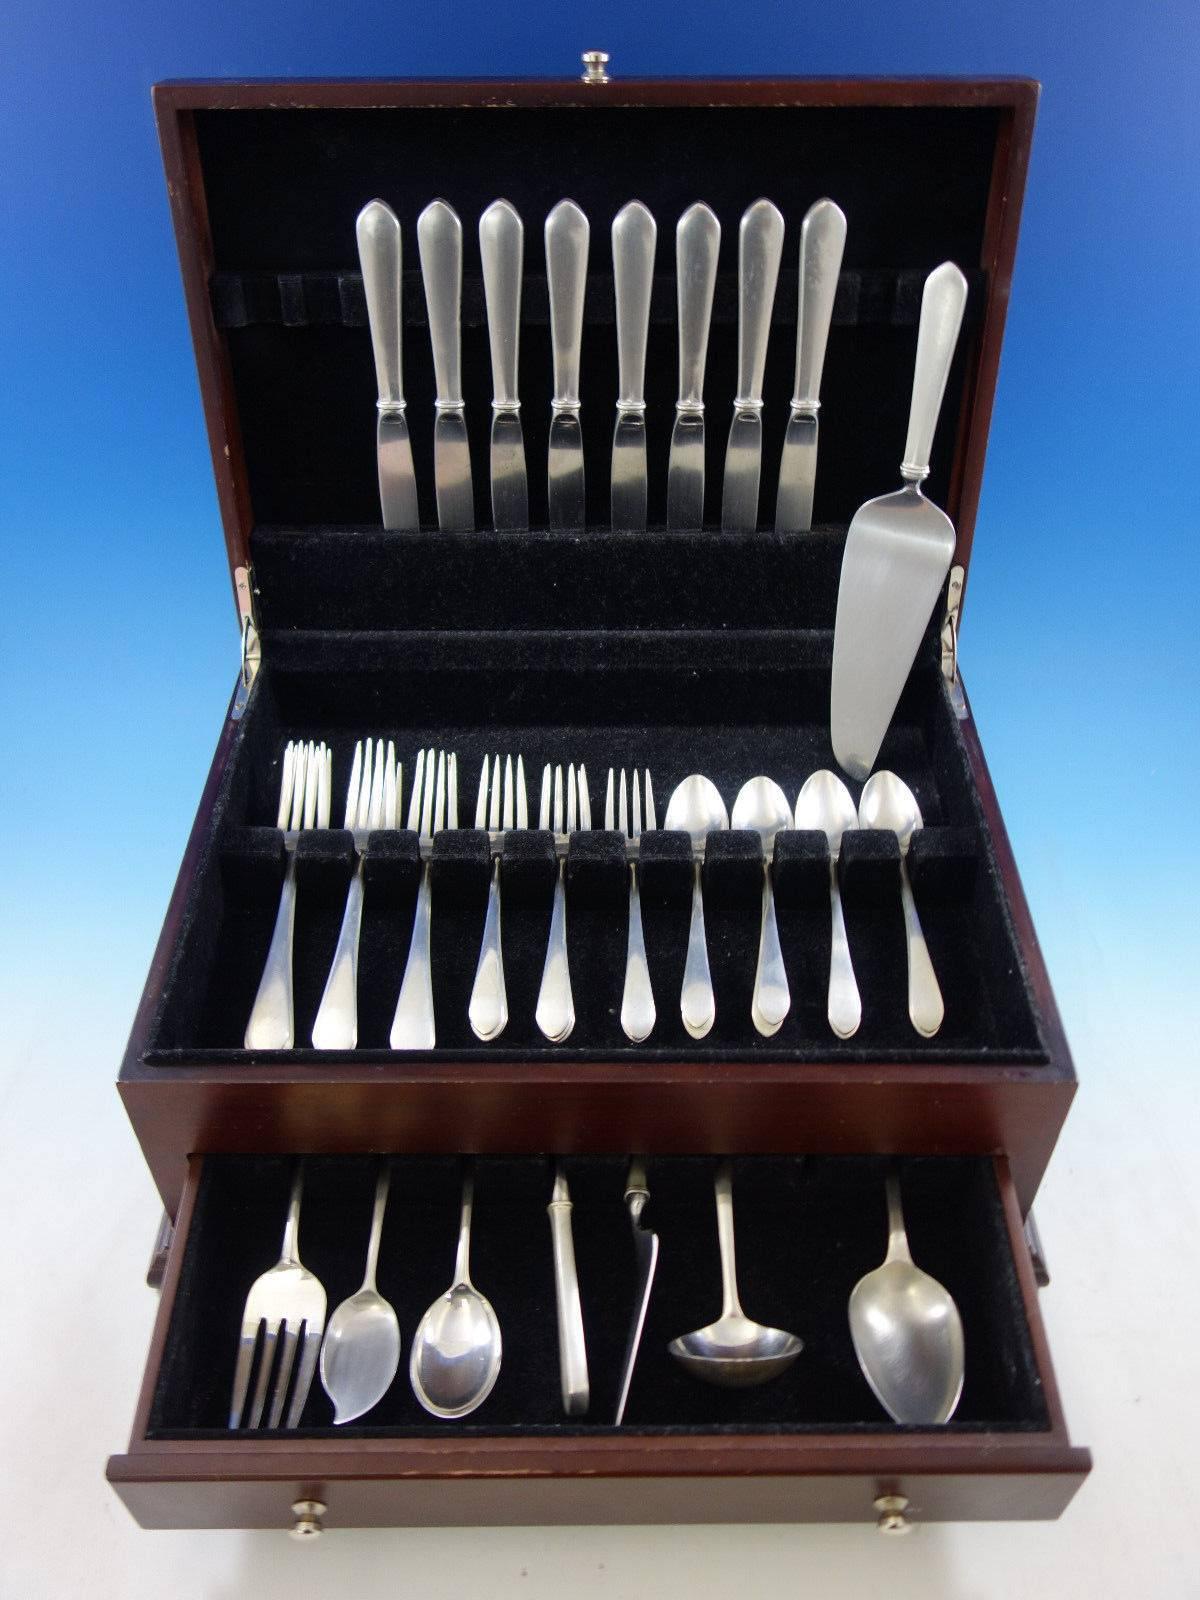 Early American Plain by Lunt sterling silver Flatware set, 40 pieces. This set includes: 

Eight knives, 8 3/4